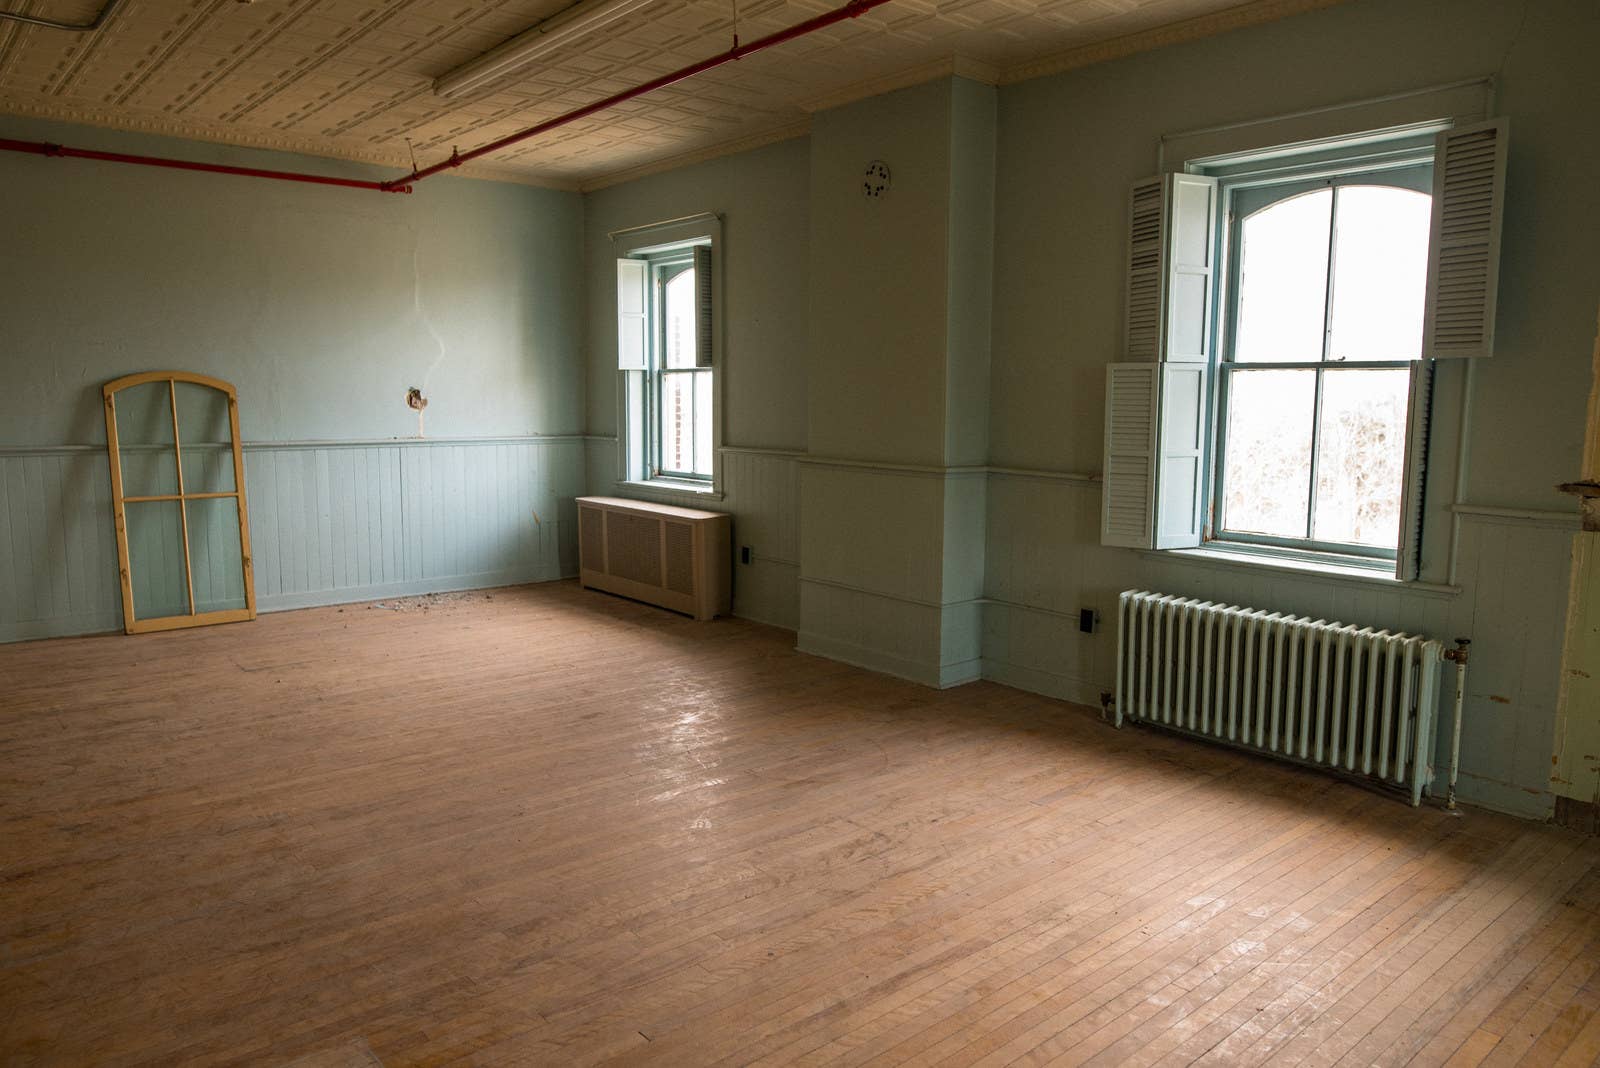 The old girls dormitory of the now-closed St. Joseph’s Orphanage in Burlington, Vermont.